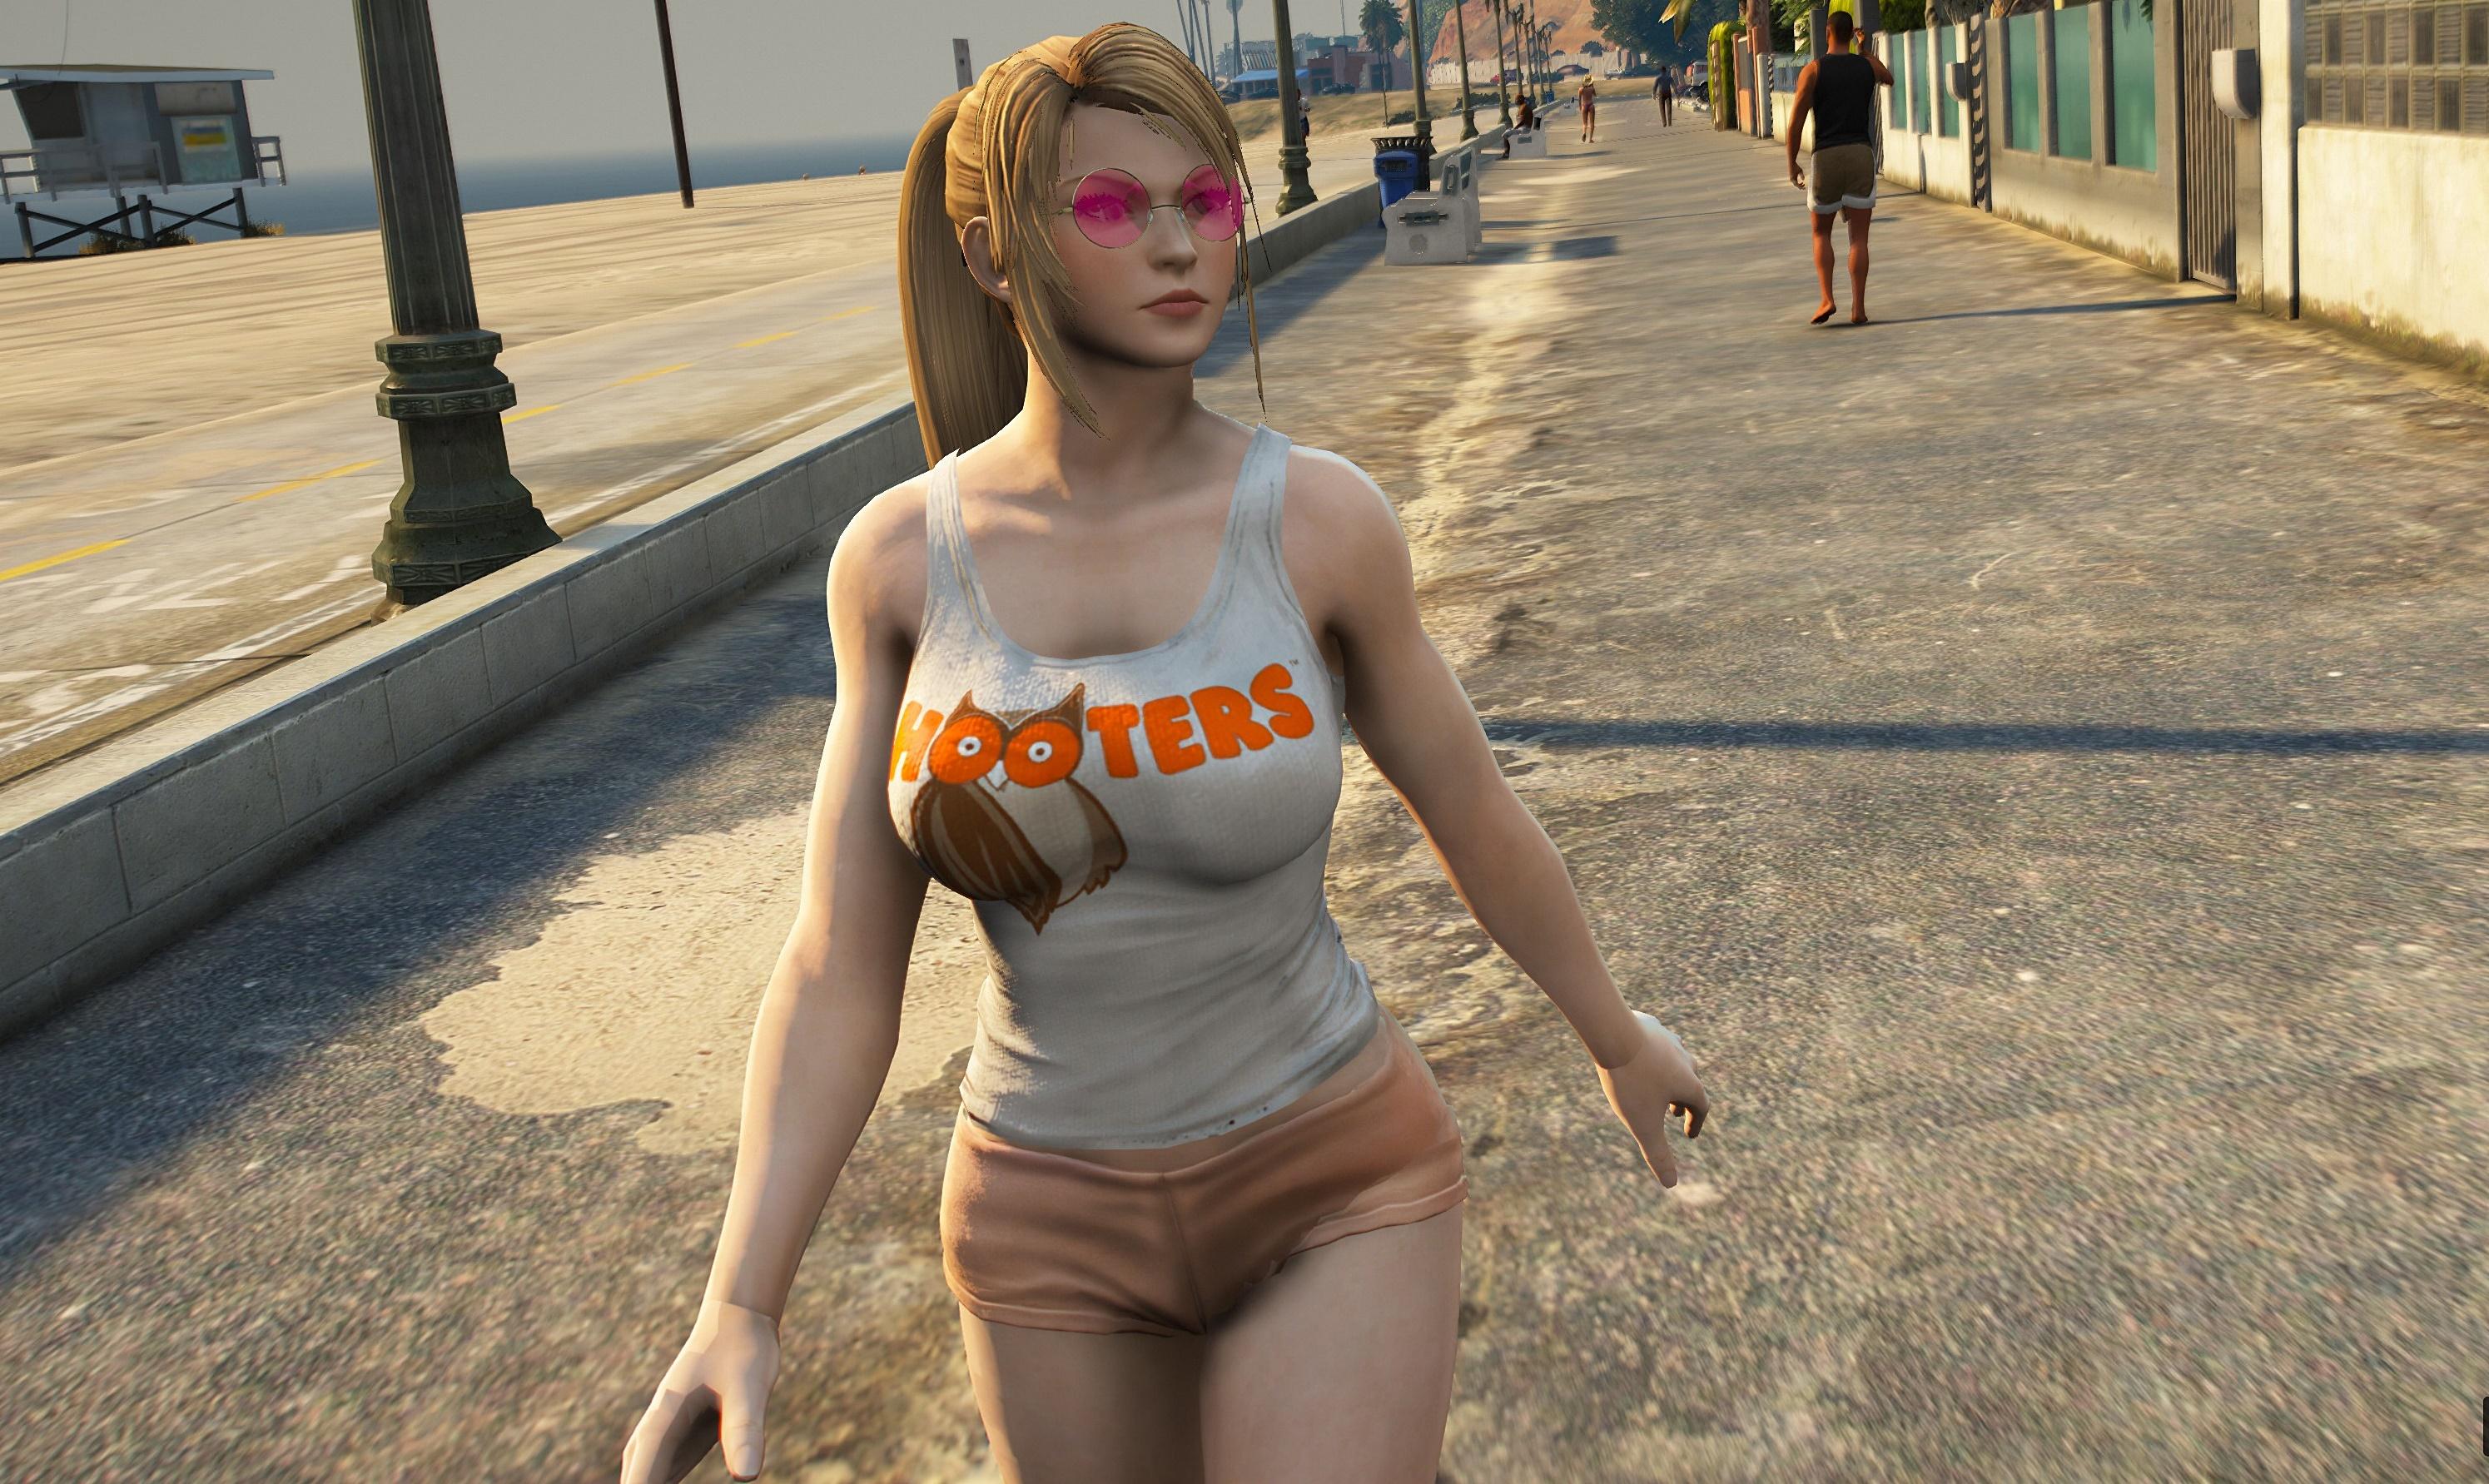 this mod to use PEDS as Add-Ons: https://www.gta5-mods.com/scripts/addonped...